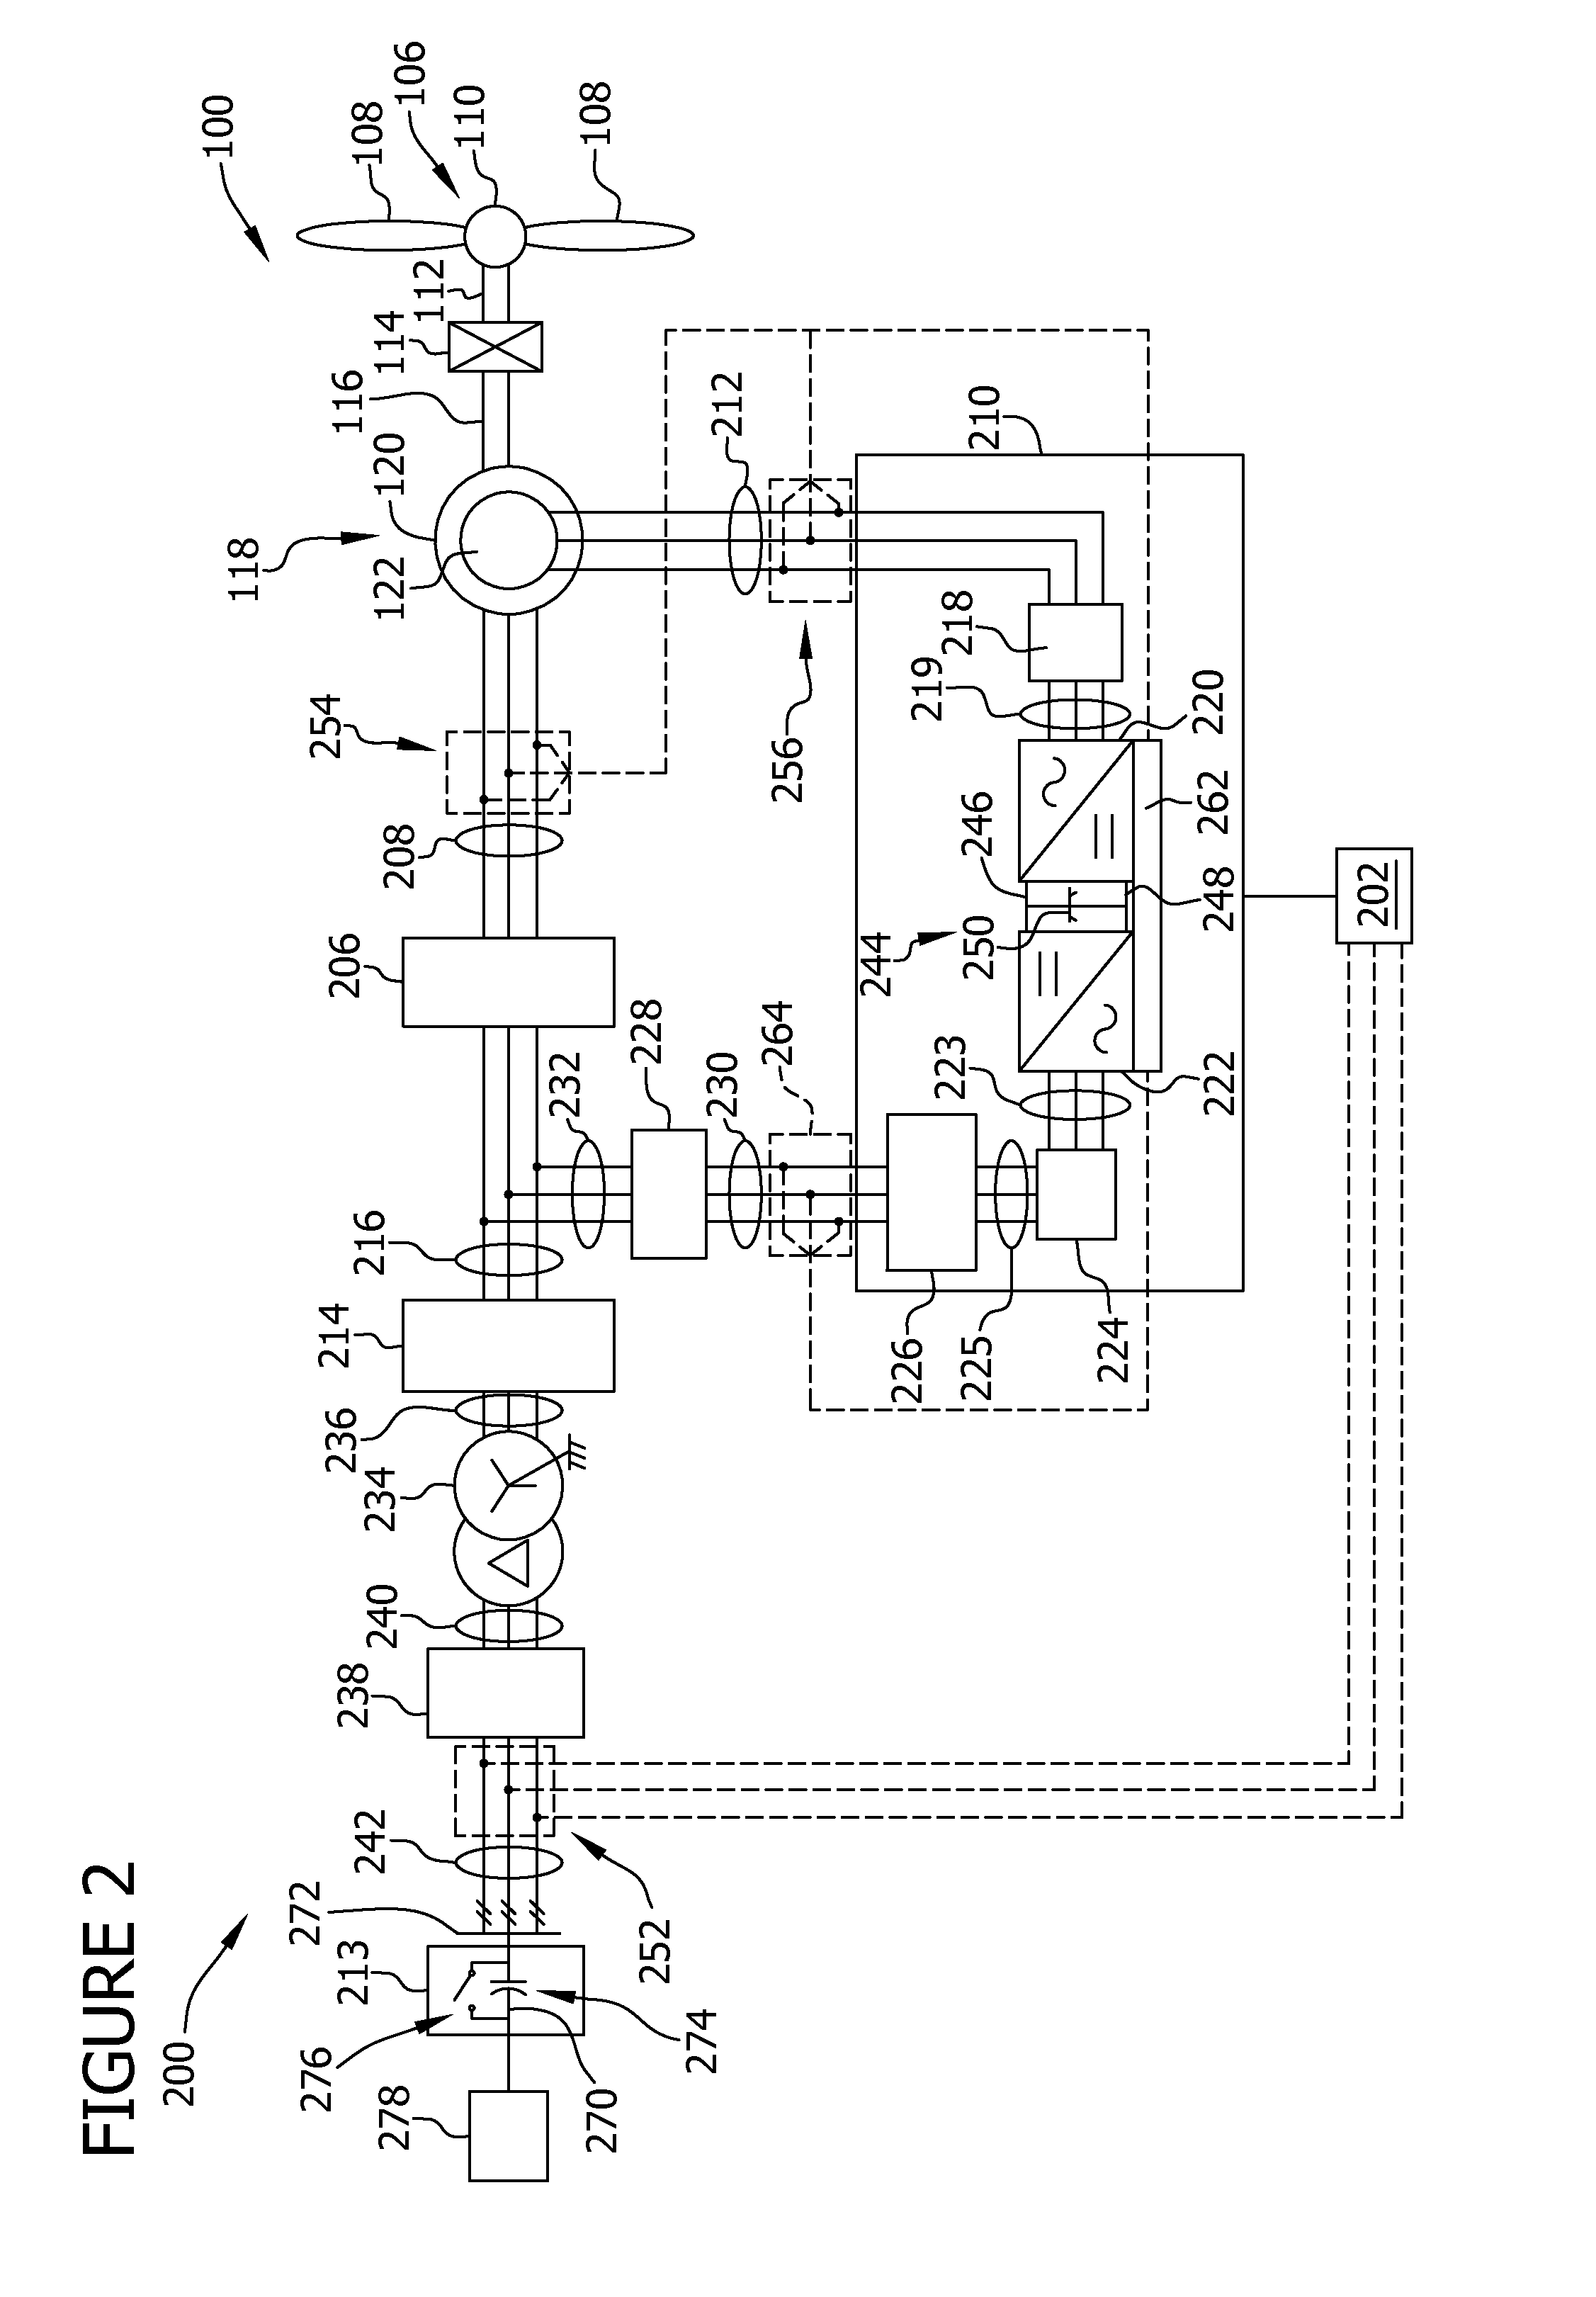 Method and apparatus for generating power in a wind turbine